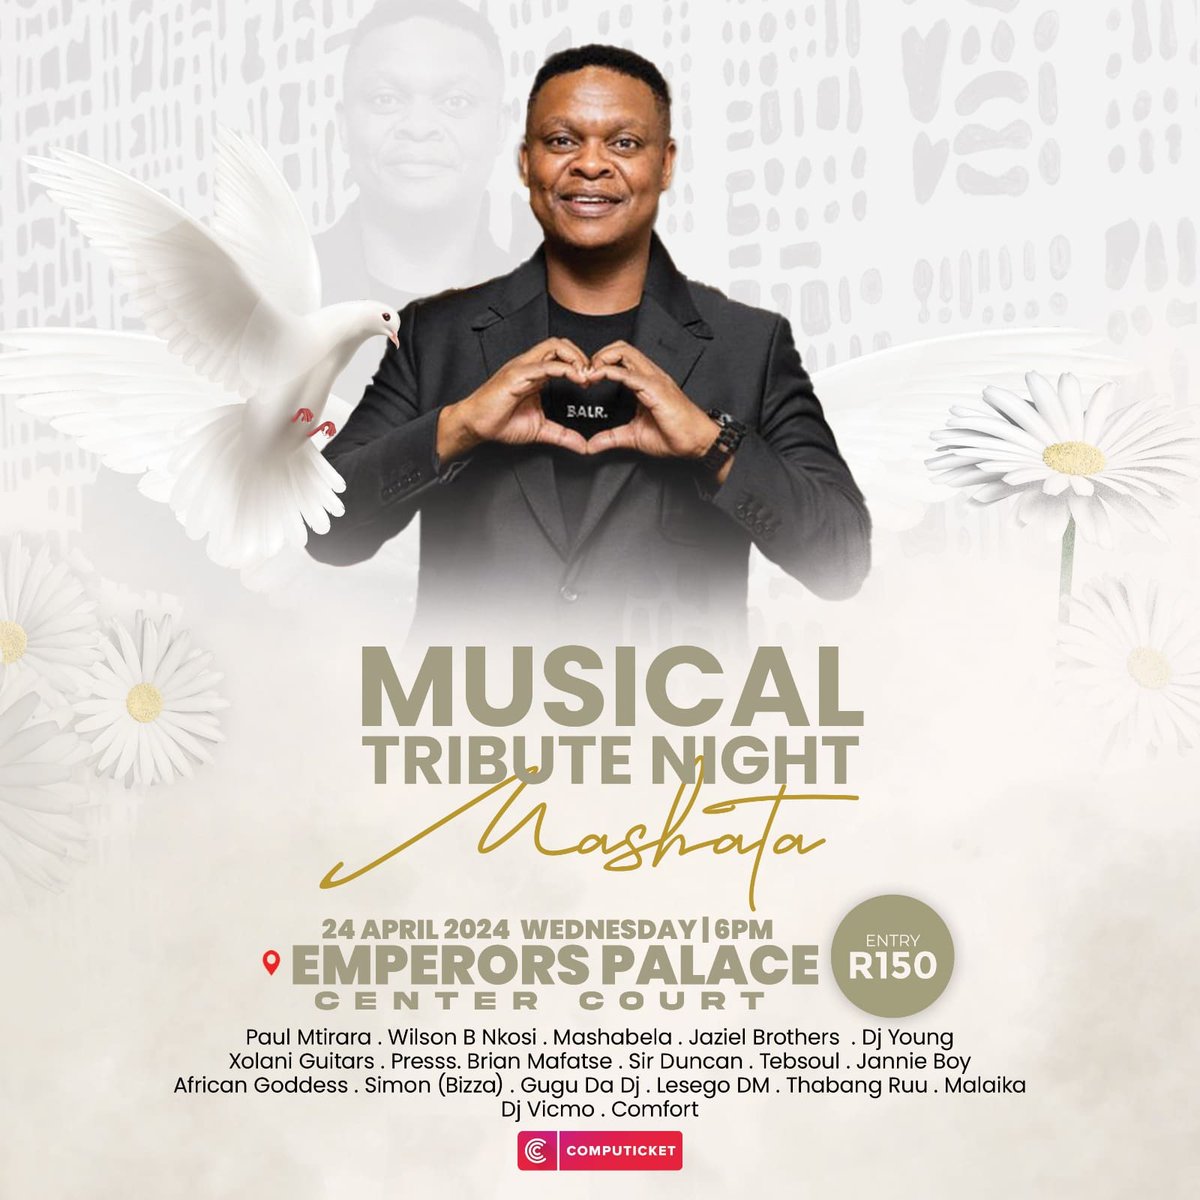 In light of the immense response, we have made the decision to change the venue for Mashata's Musical tribute to a new venue offers greater capacity, ensuring that everyone who wishes to pay their respects can do so comfortably.Tickets are now @computicket